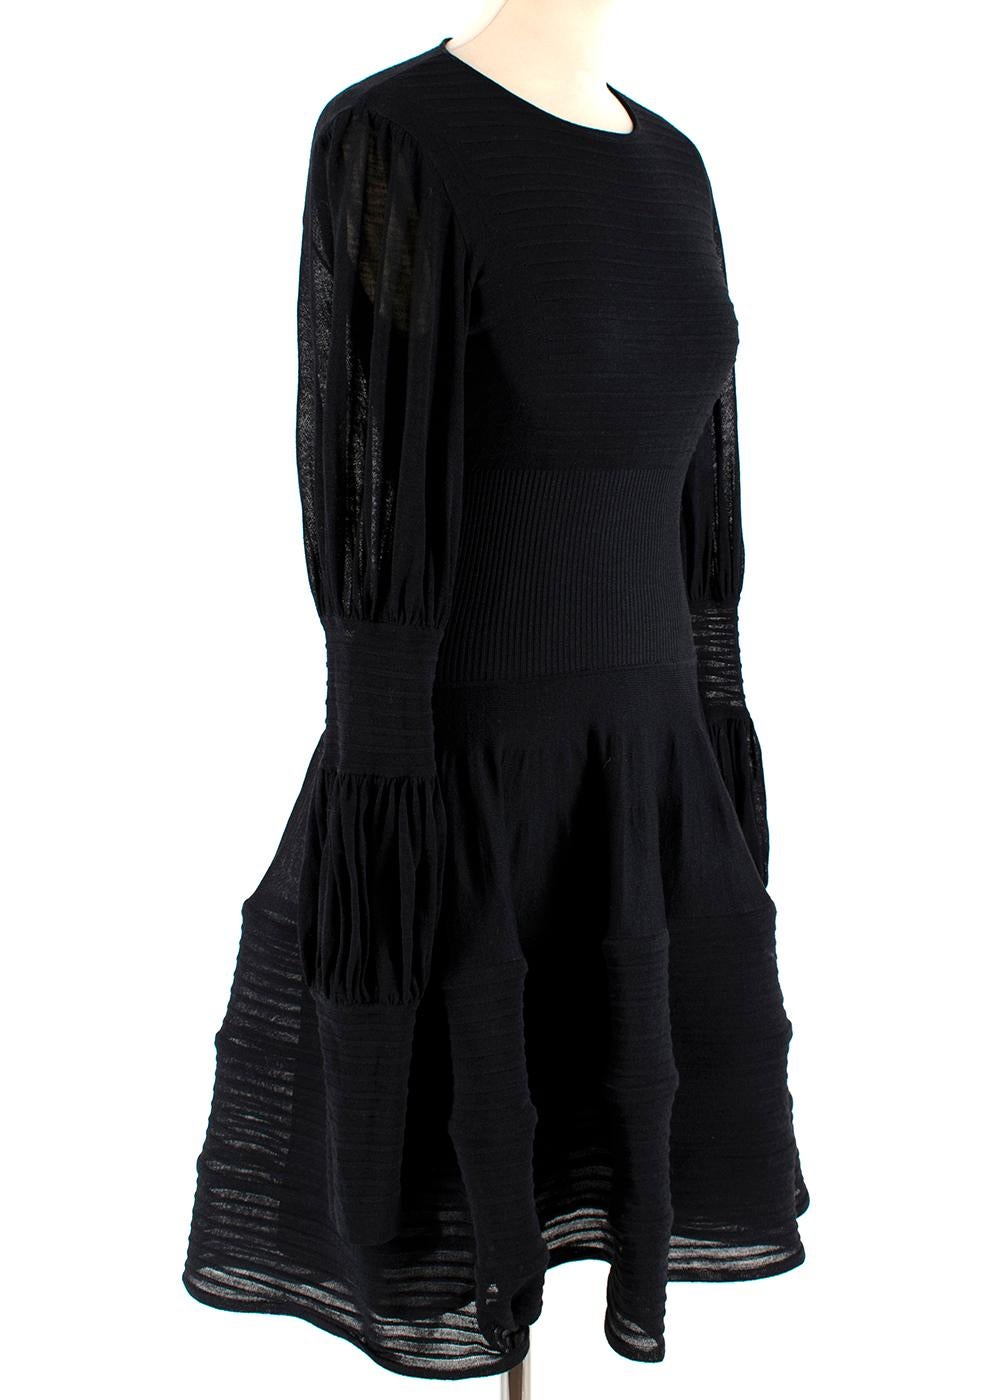 Alexander McQueen Black Ribbed Silk Dress - M In Excellent Condition For Sale In London, GB